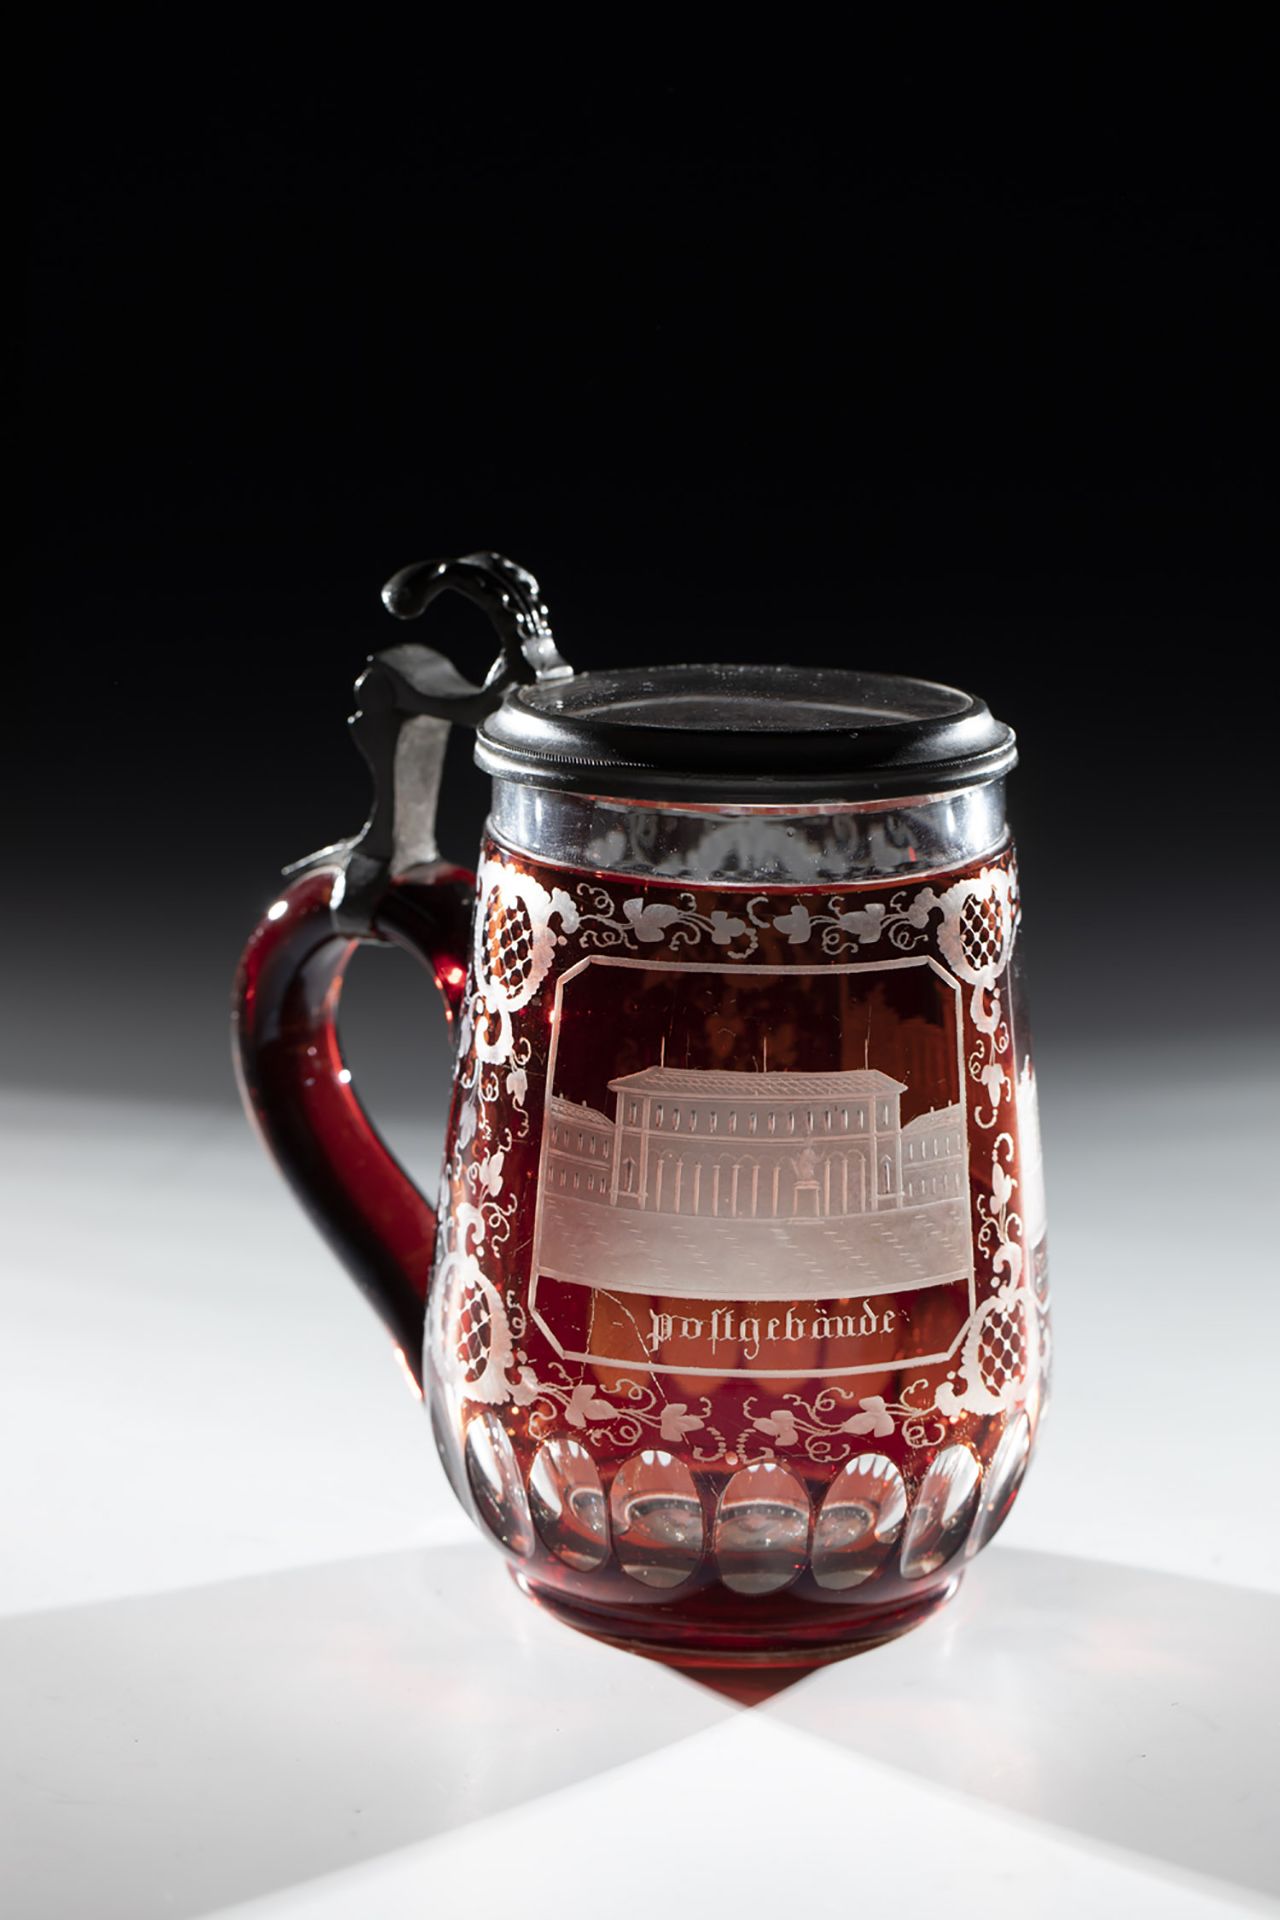 Lidded jug with views of Winterthur - Image 3 of 3